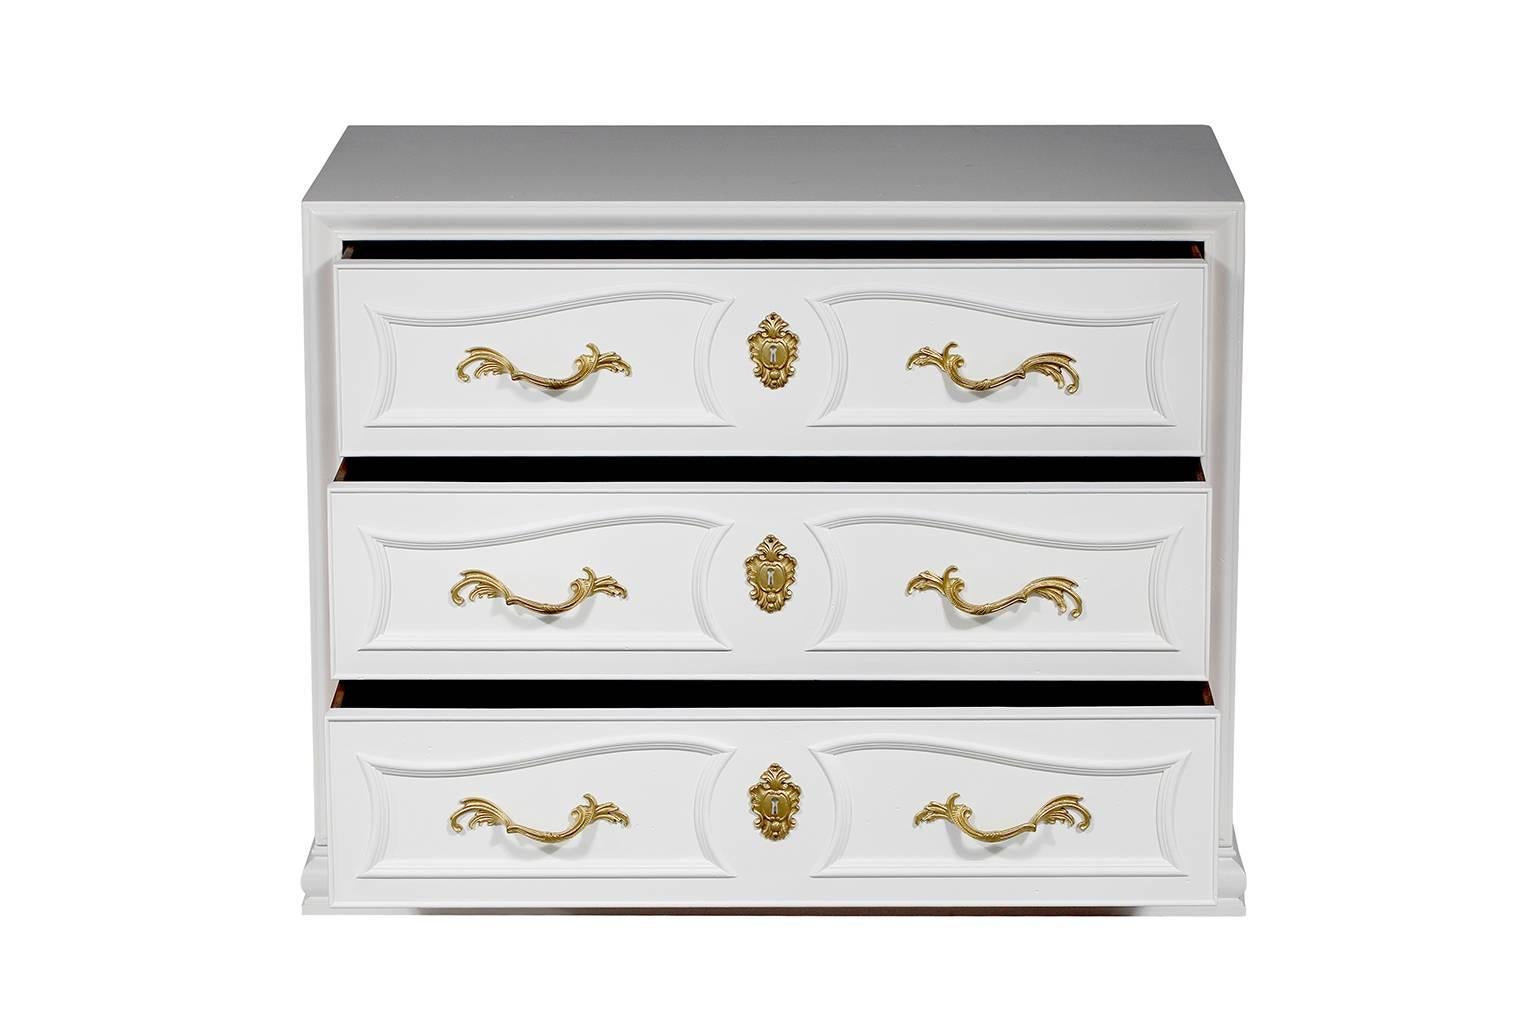 Pair of vintage French-style Henredon chests newly lacquerd in white with brass hardware and three drawers each.